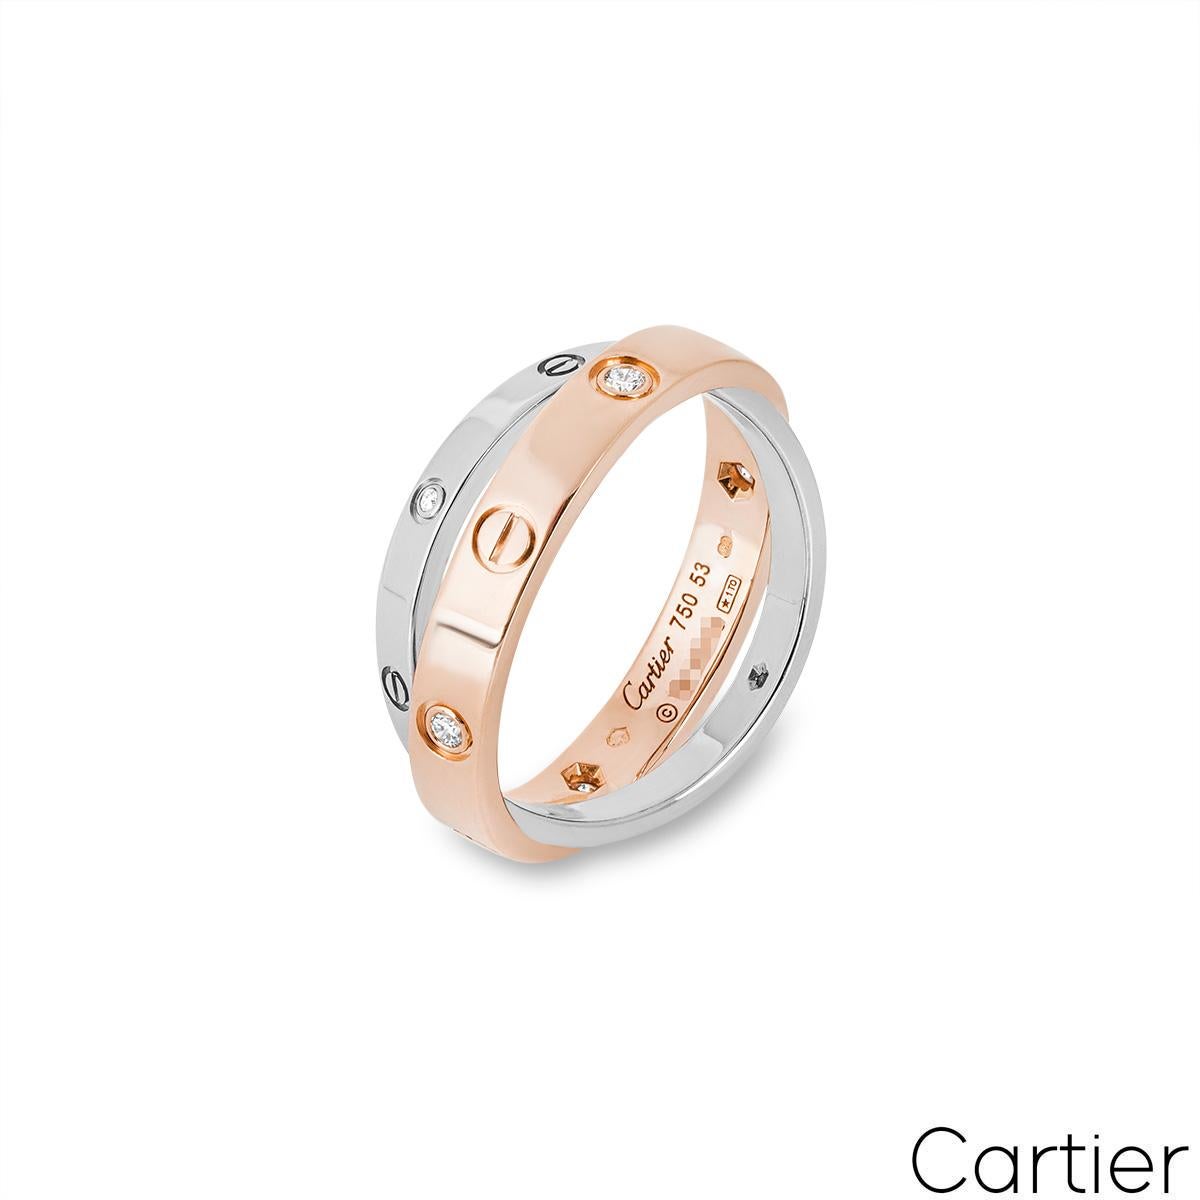 A stylish 18k rose and white gold diamond double ring by Cartier from the Love collection. The 3.5mm rose gold band is set with 4 round brilliant cut diamonds and alternating screw motifs. Interlinking is a 2.5mm white gold band set with 2 round